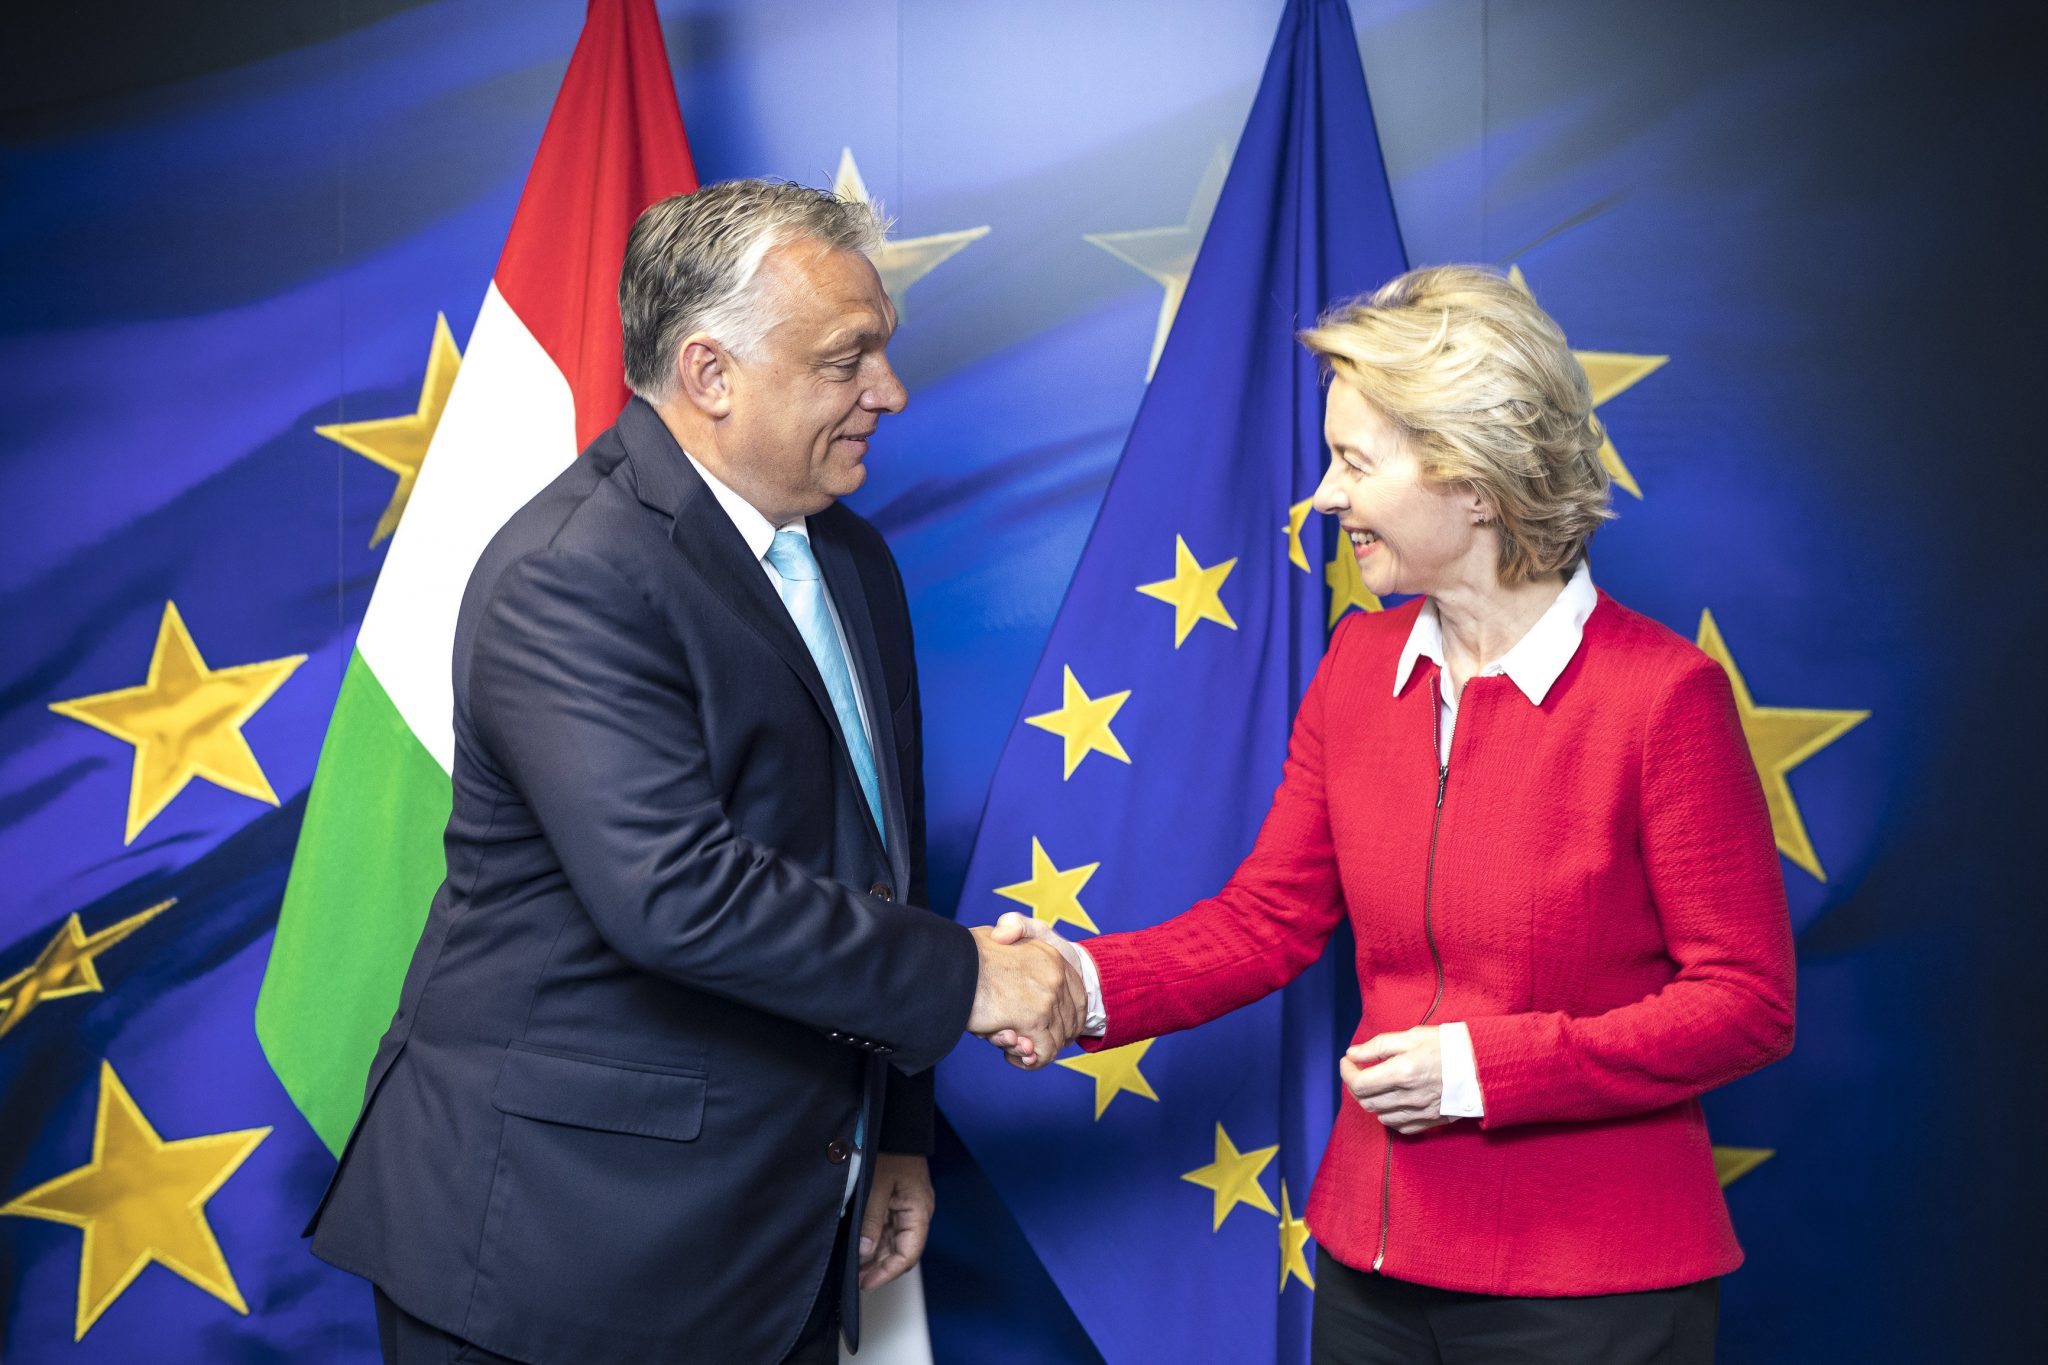 Background: Orbán Unexpectedly Asks Brussels to Disburse EU Reconstruction Fund and Loans